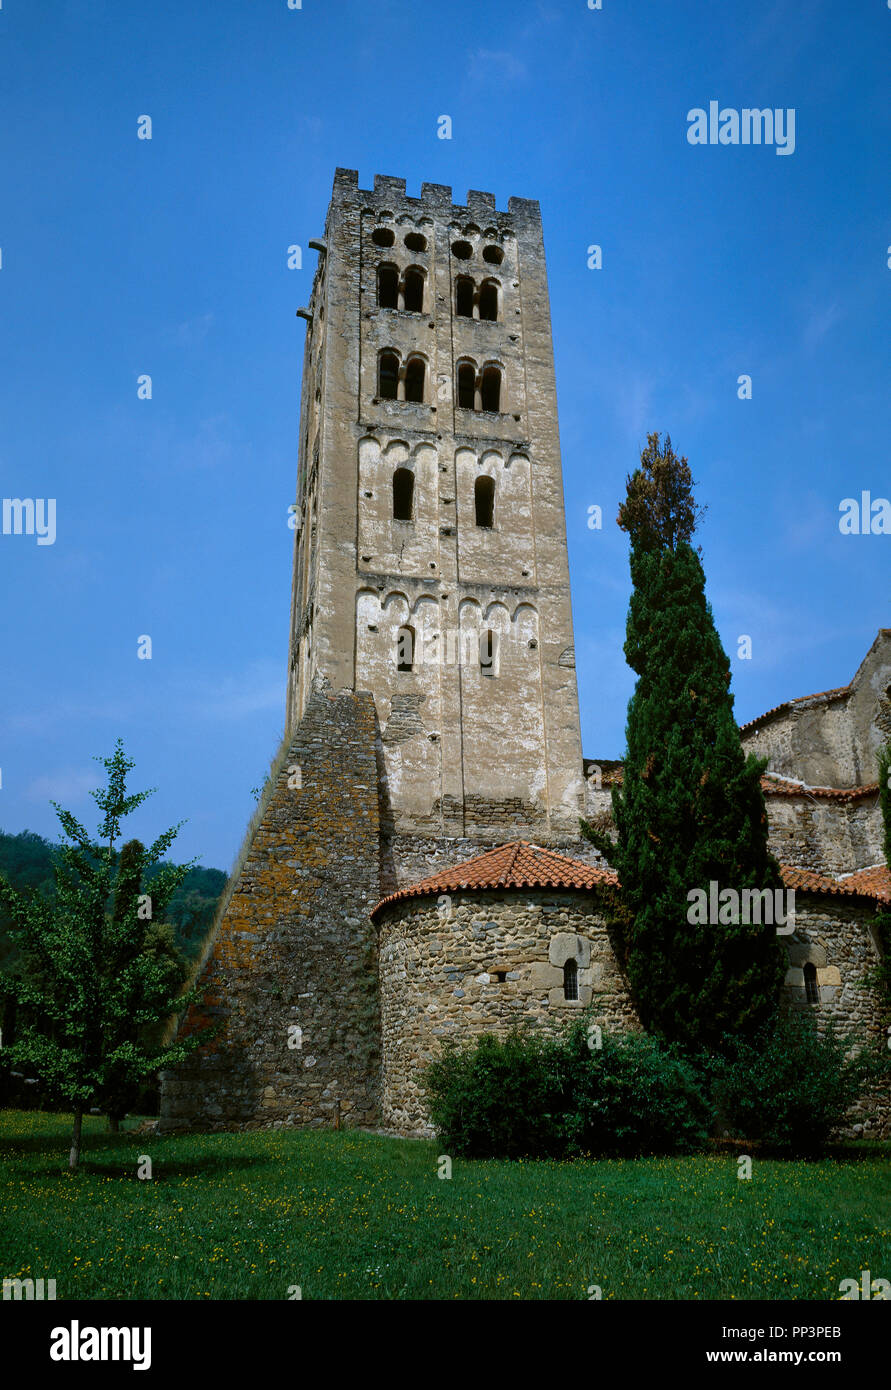 France. Pyrenees-Orientales department. Abbey of Saint-Michel de Cuxa. Benedictine abbey. Romanesque bell tower, Lombard style, 11th century. Single windows in the two lower floors and double in the two upper floors. The buttress is dated in 14th century. Stock Photo